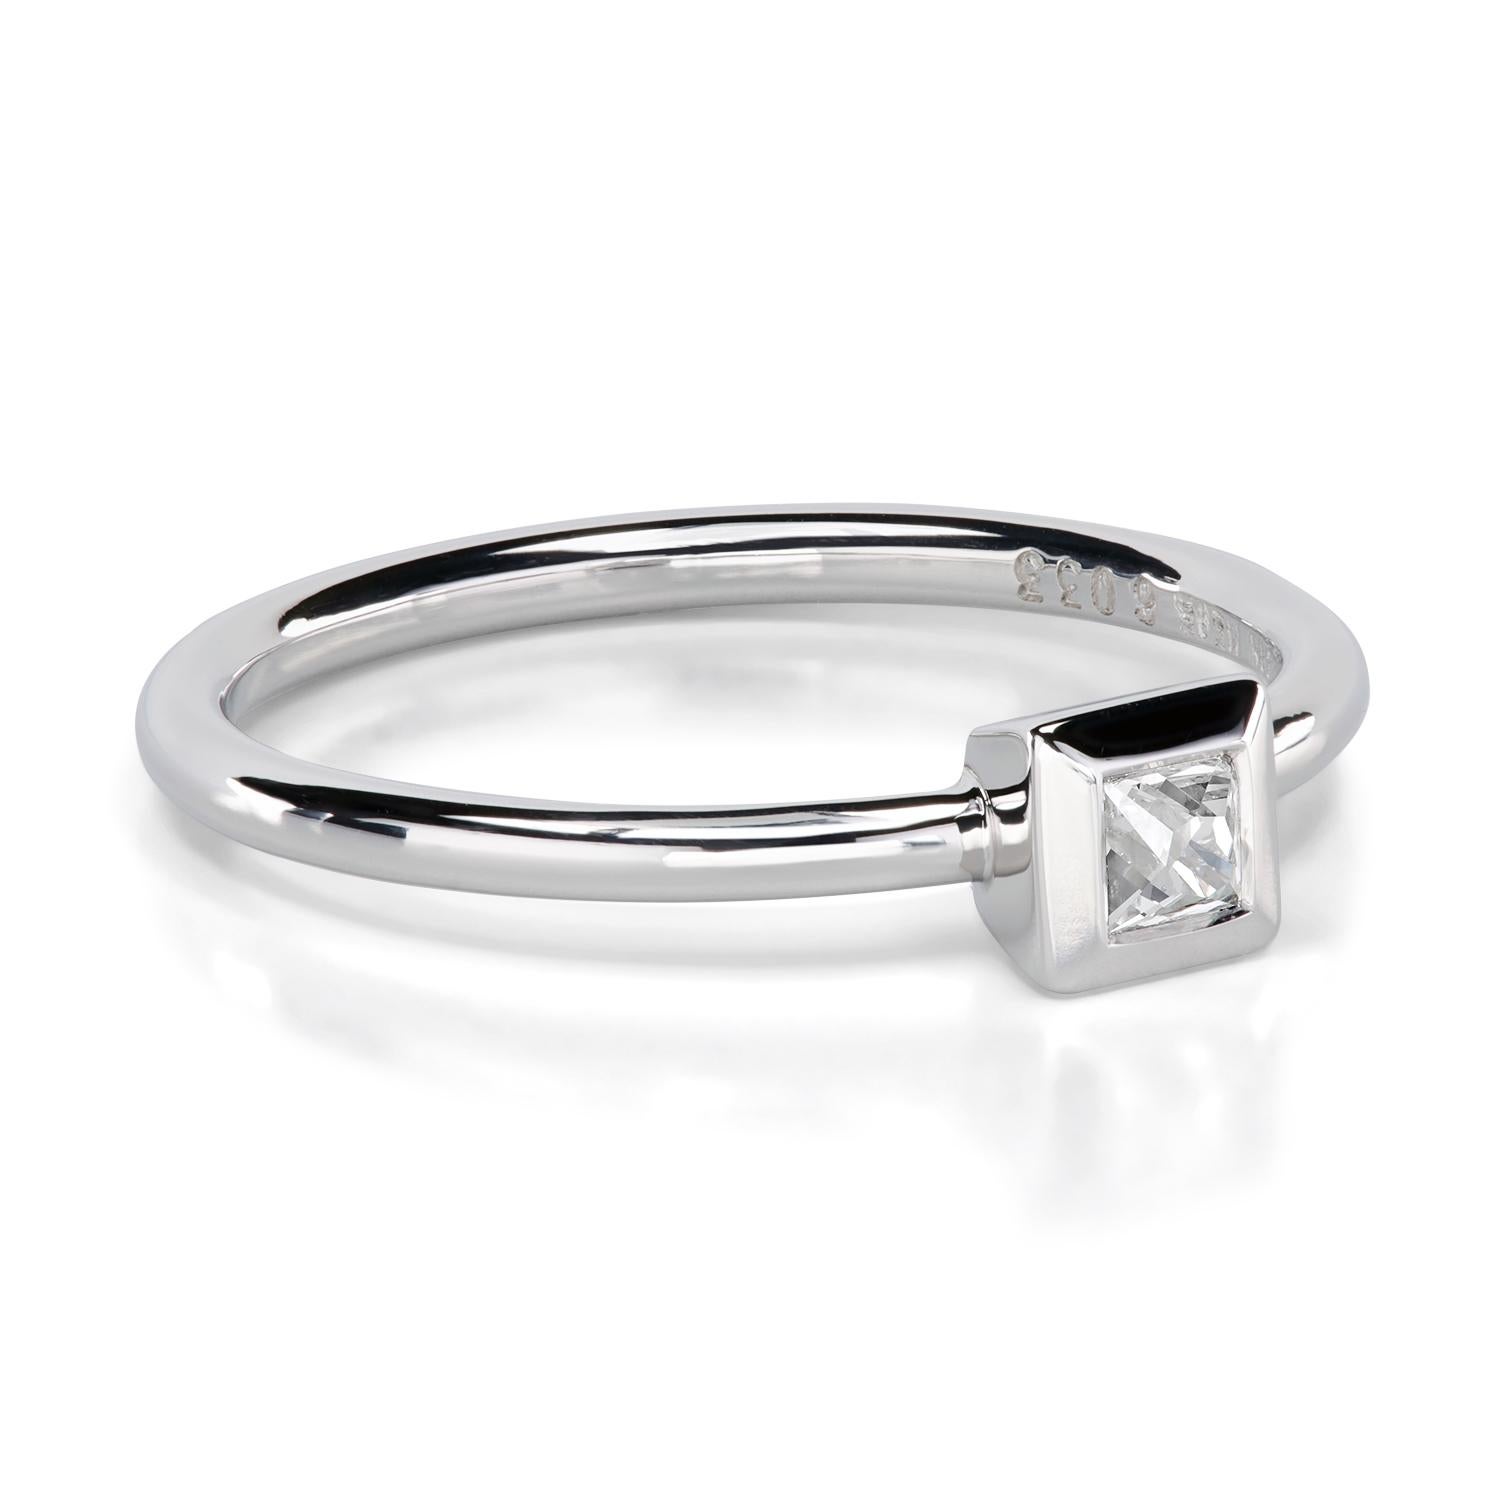 Super cute ring with a small but mighty 0.11-carat French cut diamond designed for those with good taste but still burdened with student loans. This little gem of a ring is made of platinum, and it will get you through the day if you glance at your